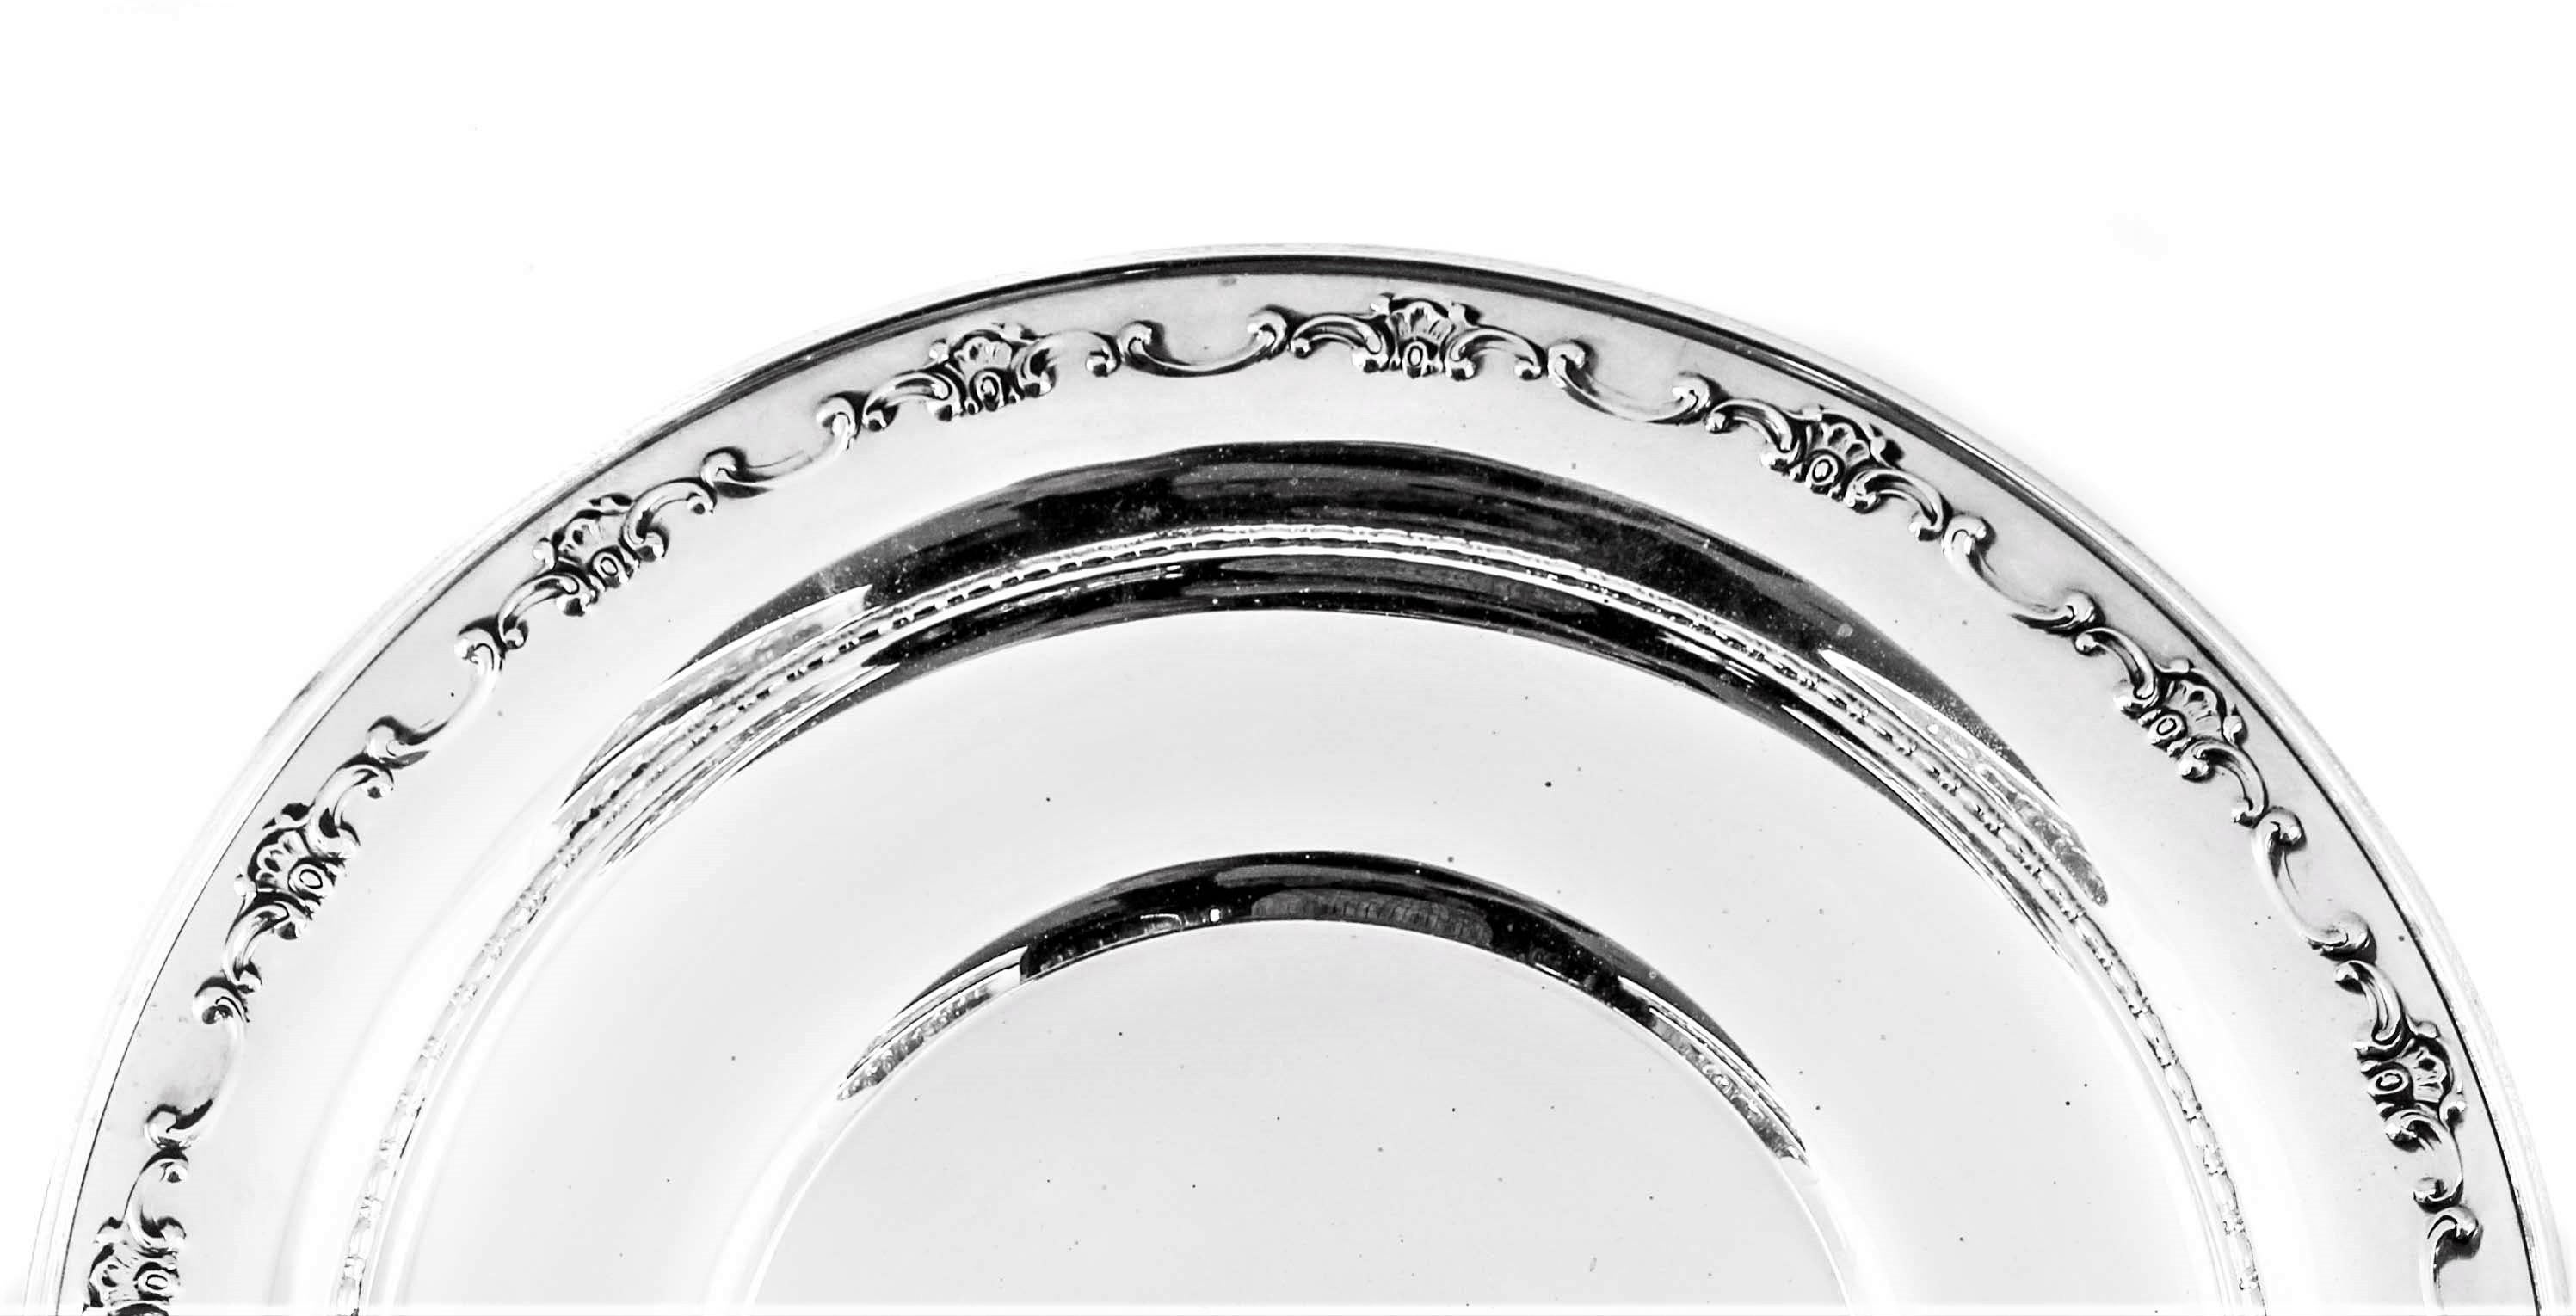 Manufactured by the Gorham Company of Rhode Island. This sterling dish has a raised, swirl-like design going around the edge. It’s a very practical size, great for sweets or baked treats.